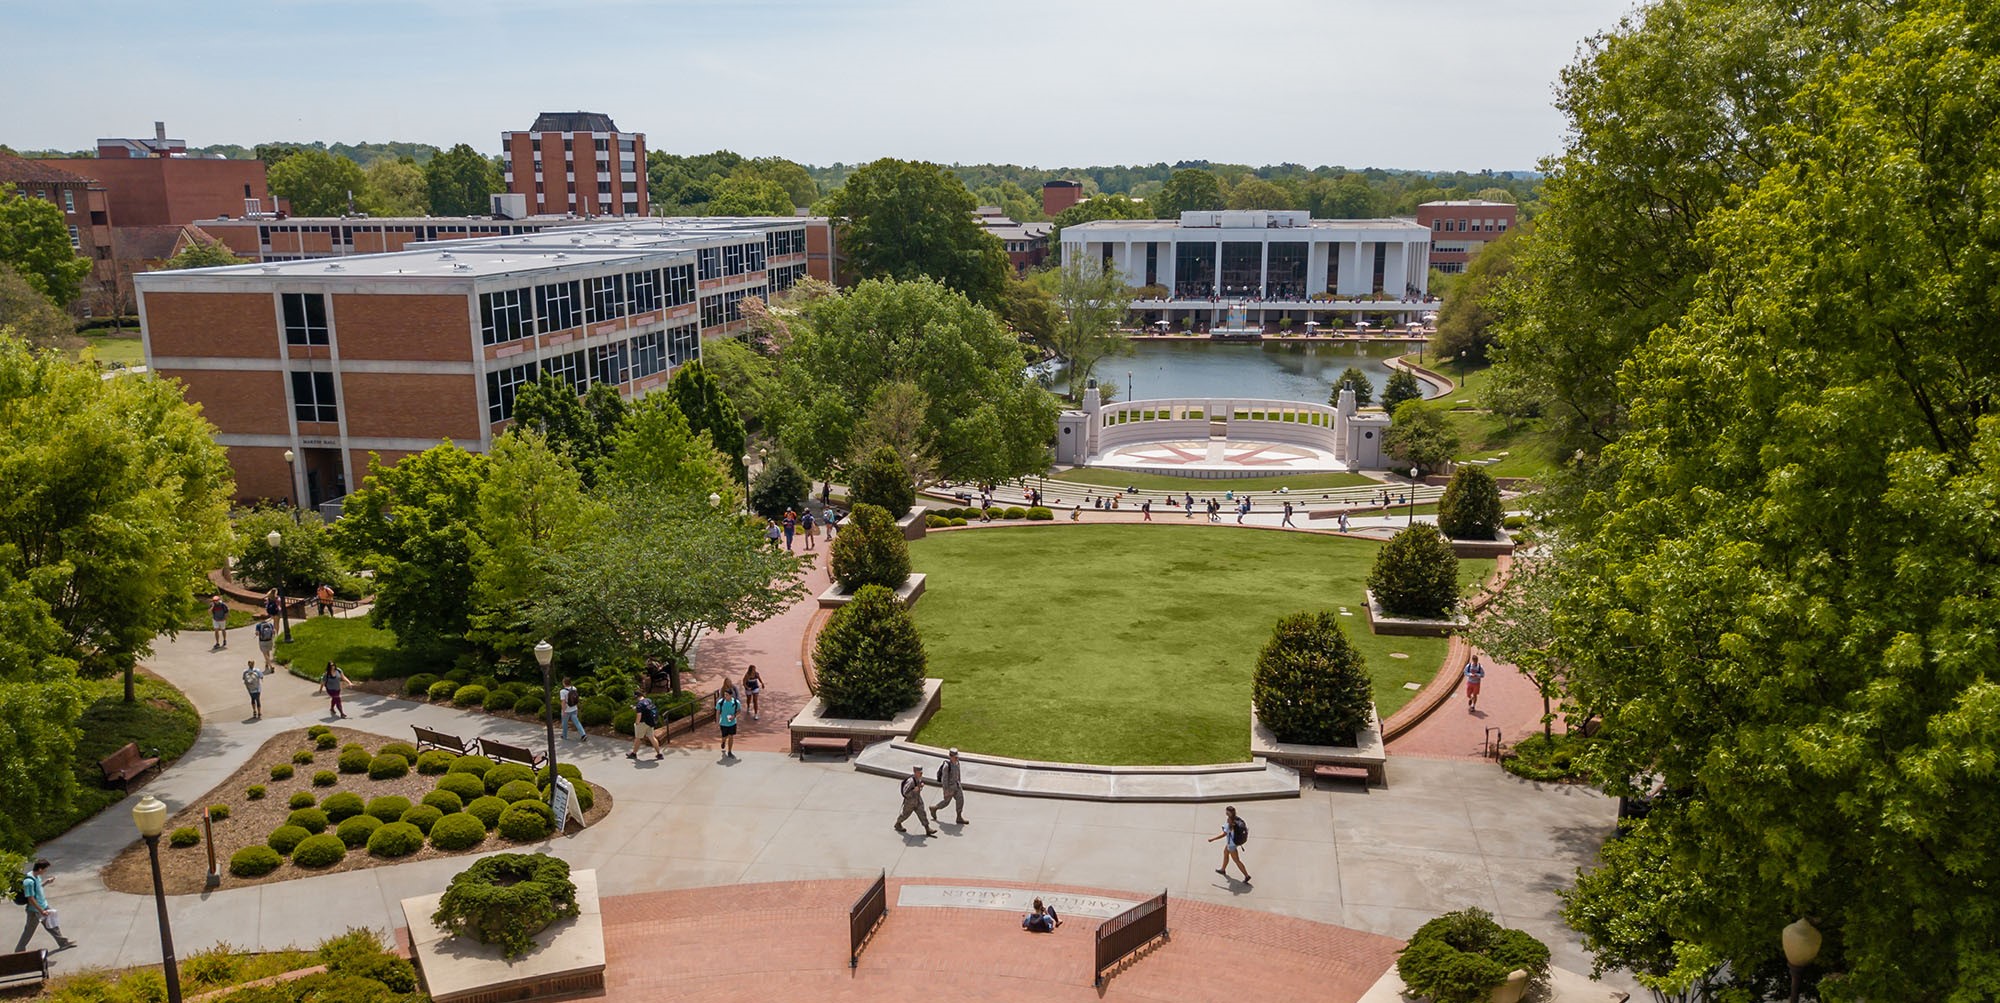 Clemson University students walking to campus with the amphitheater, reflection pond, and library in the background.